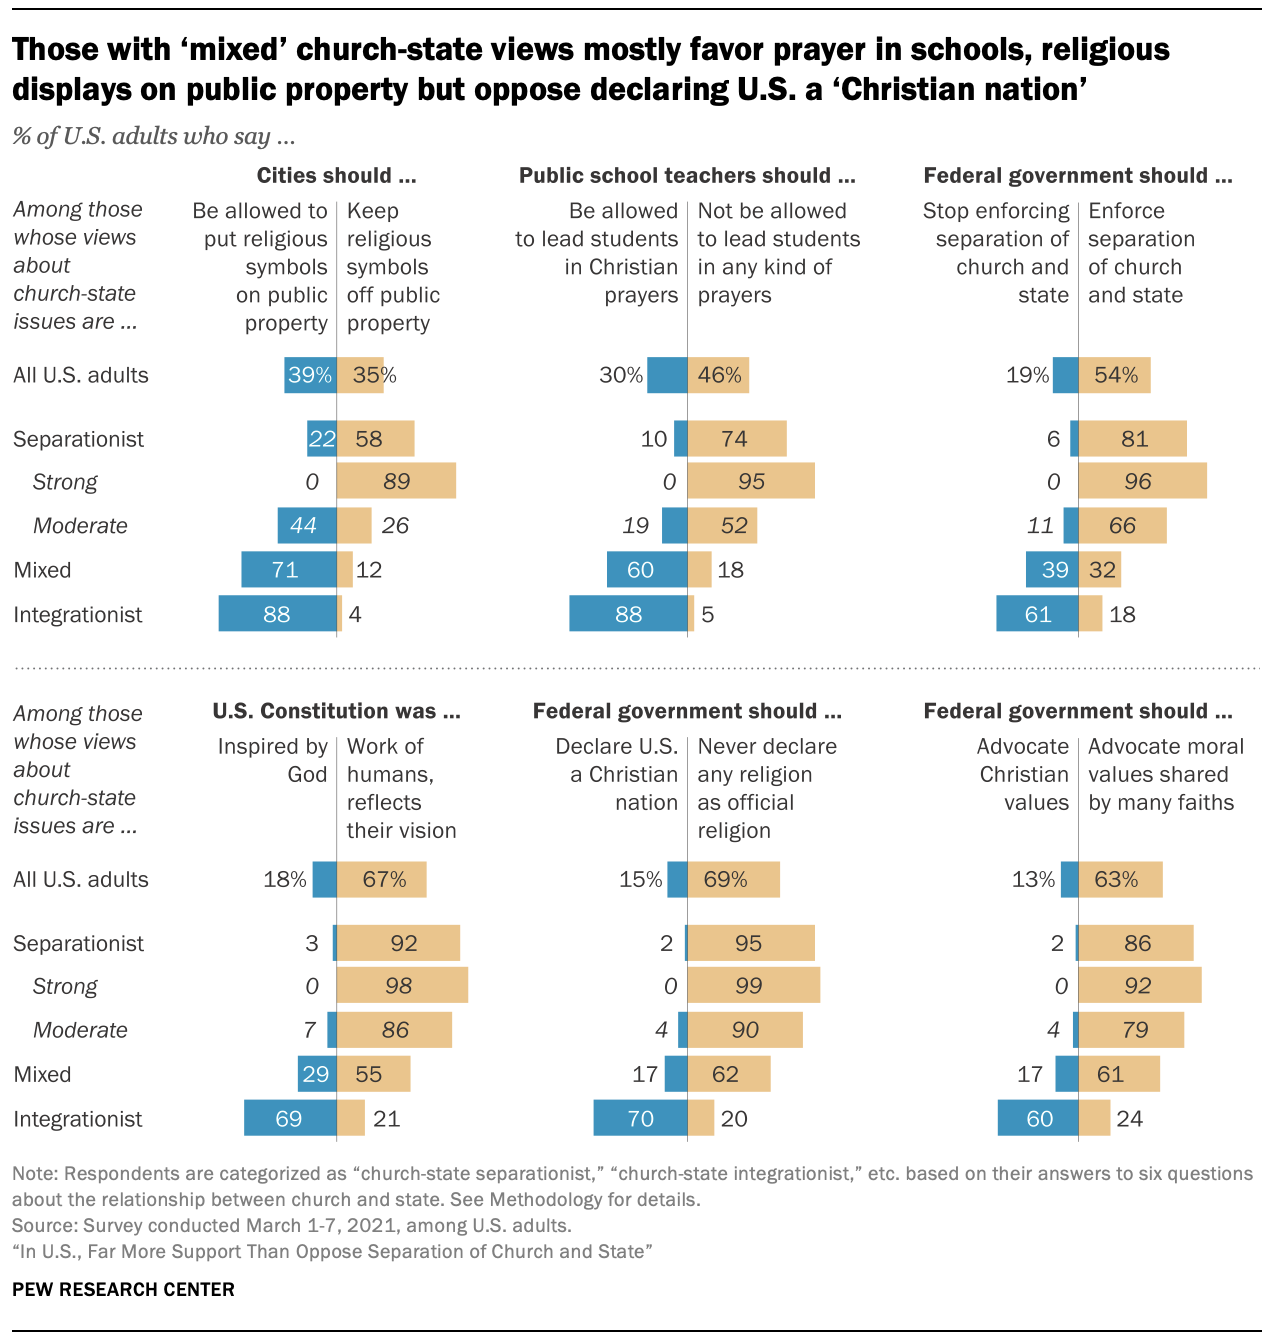 Those with ‘mixed’ church-state views mostly favor prayer in schools, religious displays on public property but oppose declaring U.S. a ‘Christian nation’